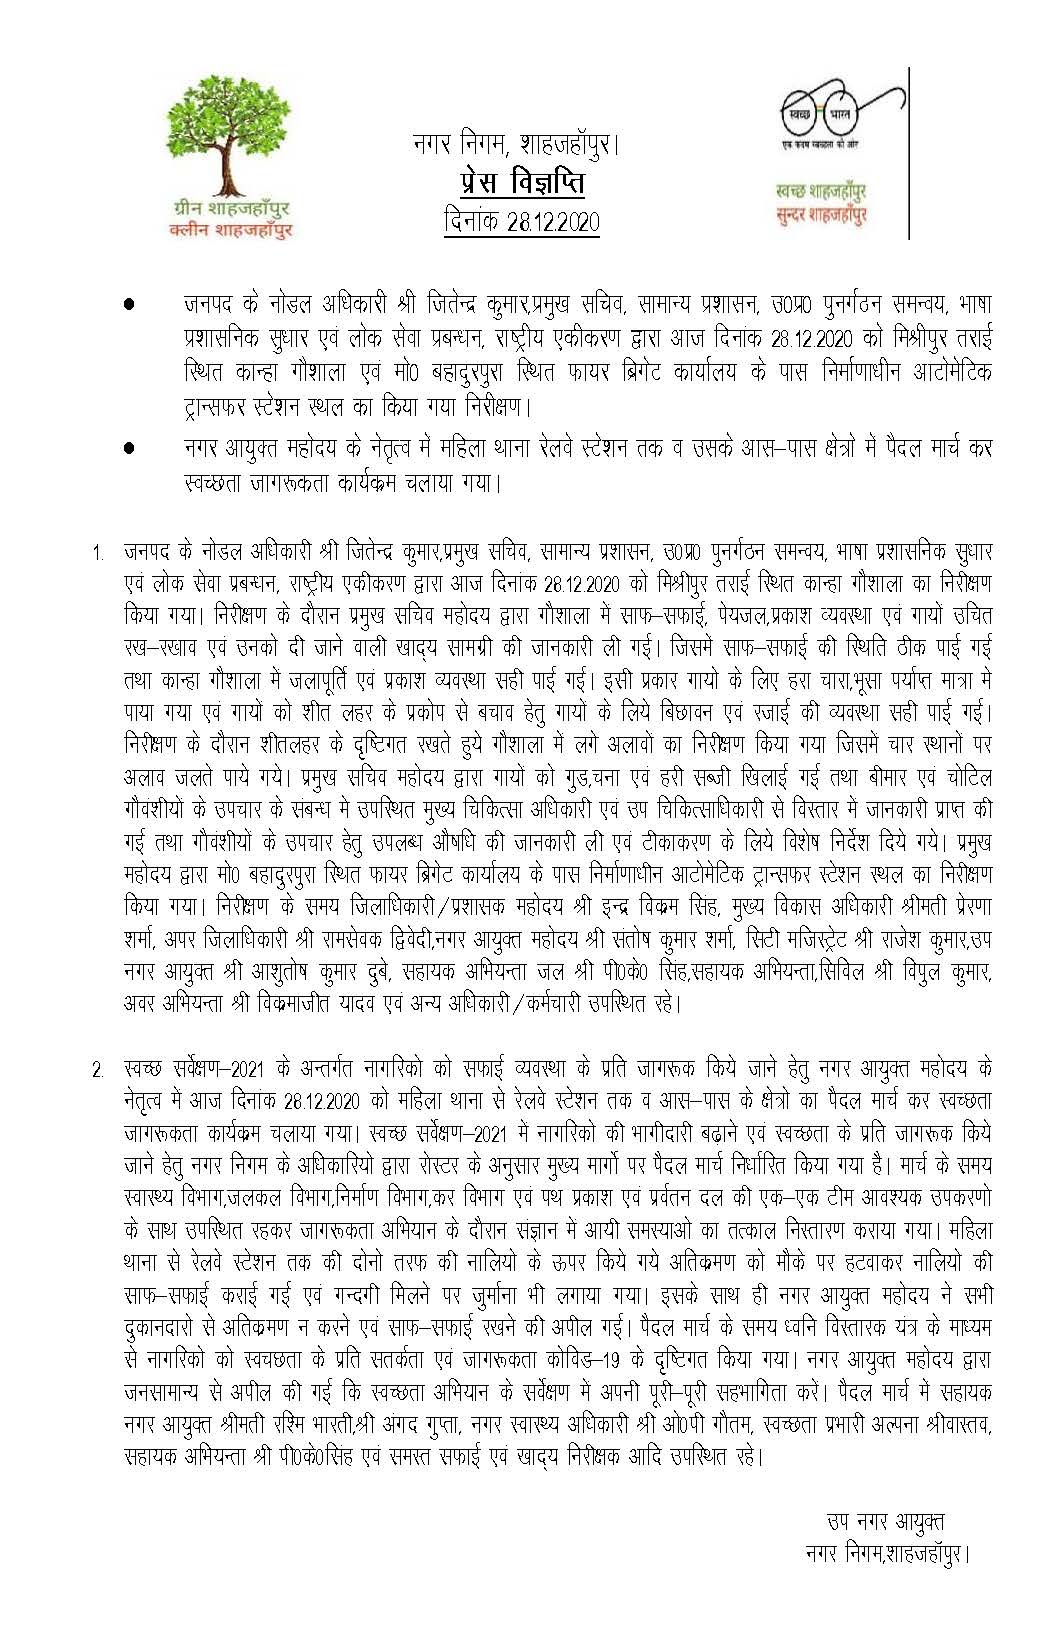 Regarding inspection of Kanha Cow Shed and under construction Automatic Transfer Station on 28.12.2020 by Nodal Officer of the district Shri Jitendra Kumar